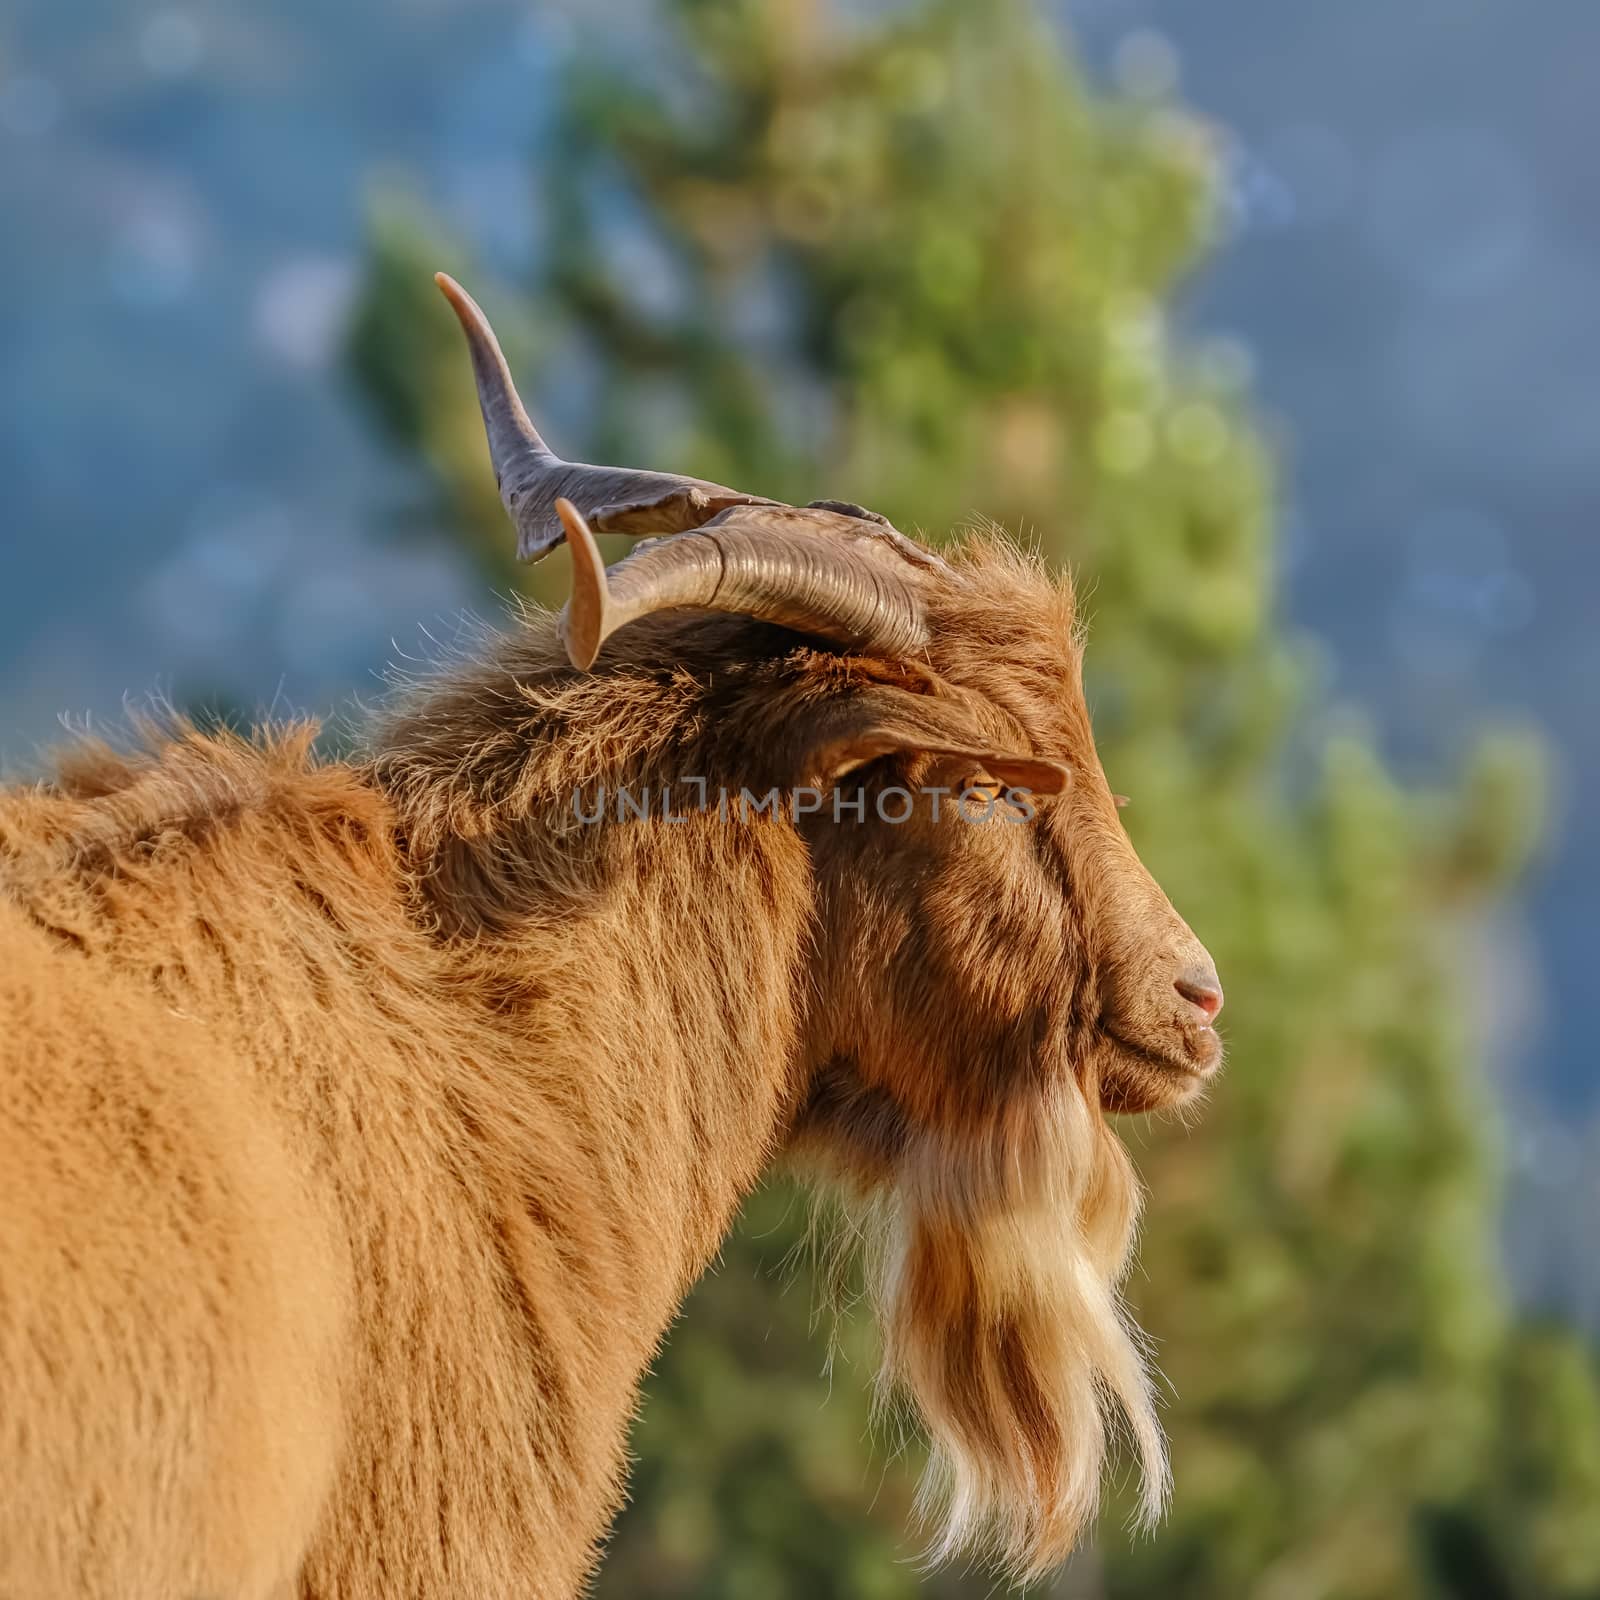 Portrait of Goat with Horns by SNR